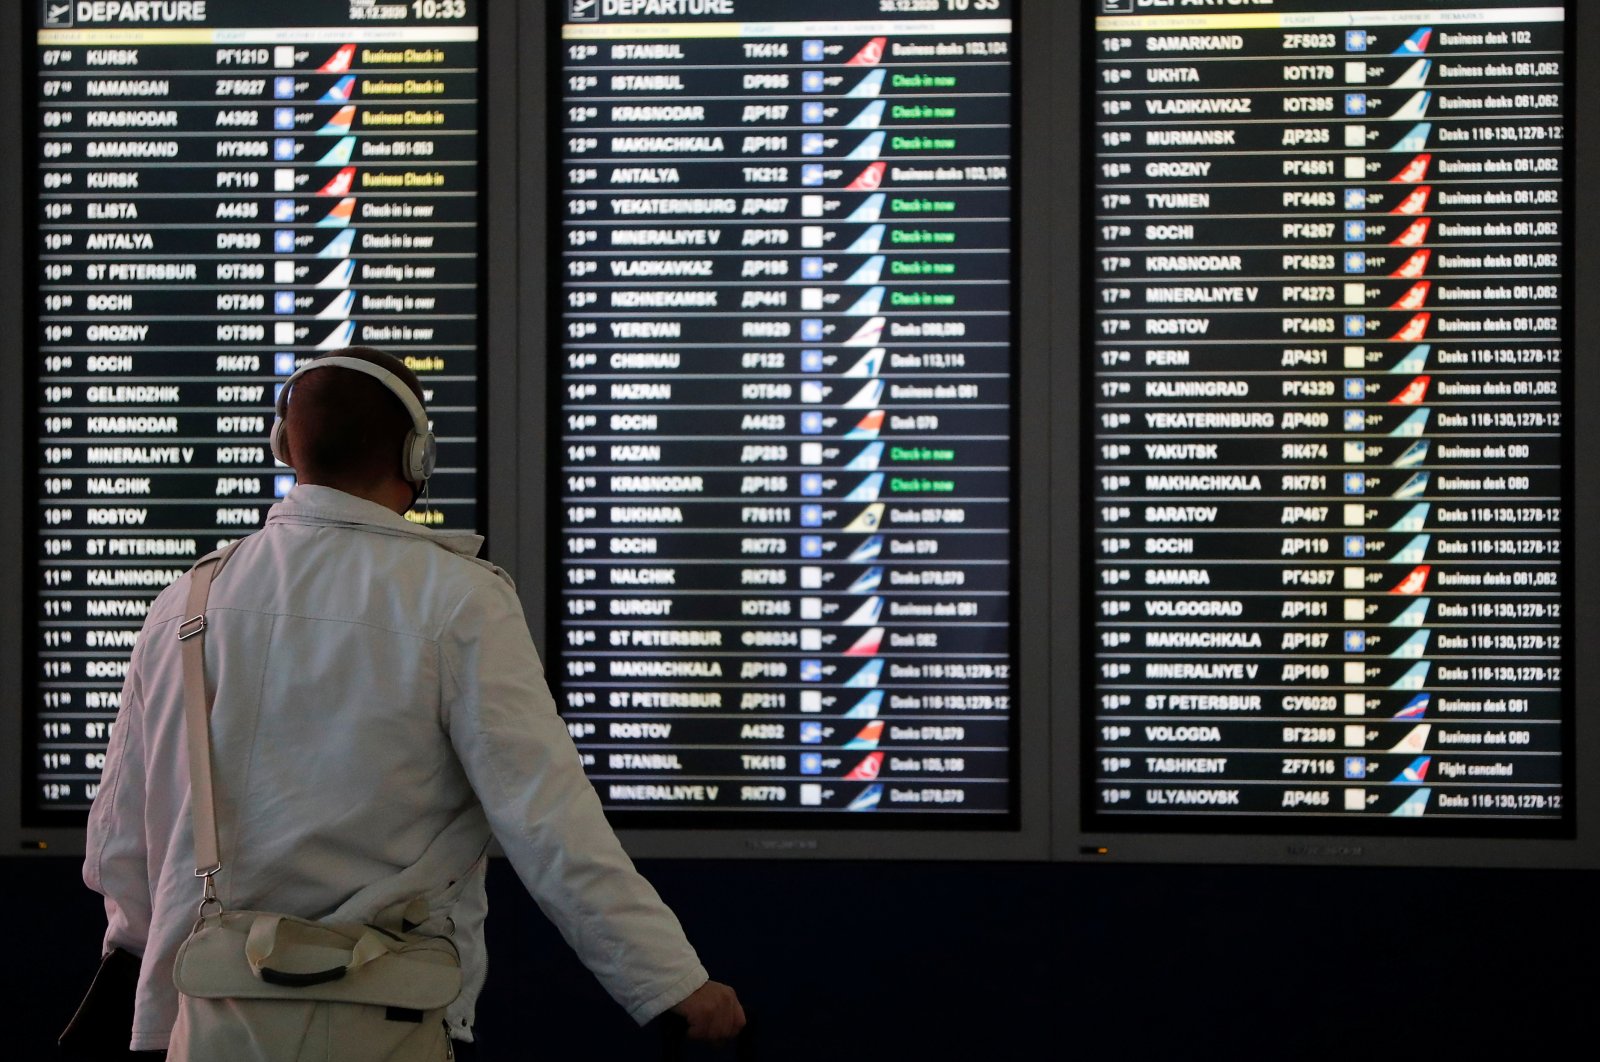 A man looks at a flight information board at the departure zone of Vnukovo International Airport in Moscow, Russia, Dec. 30, 2020. (Reuters Photo)